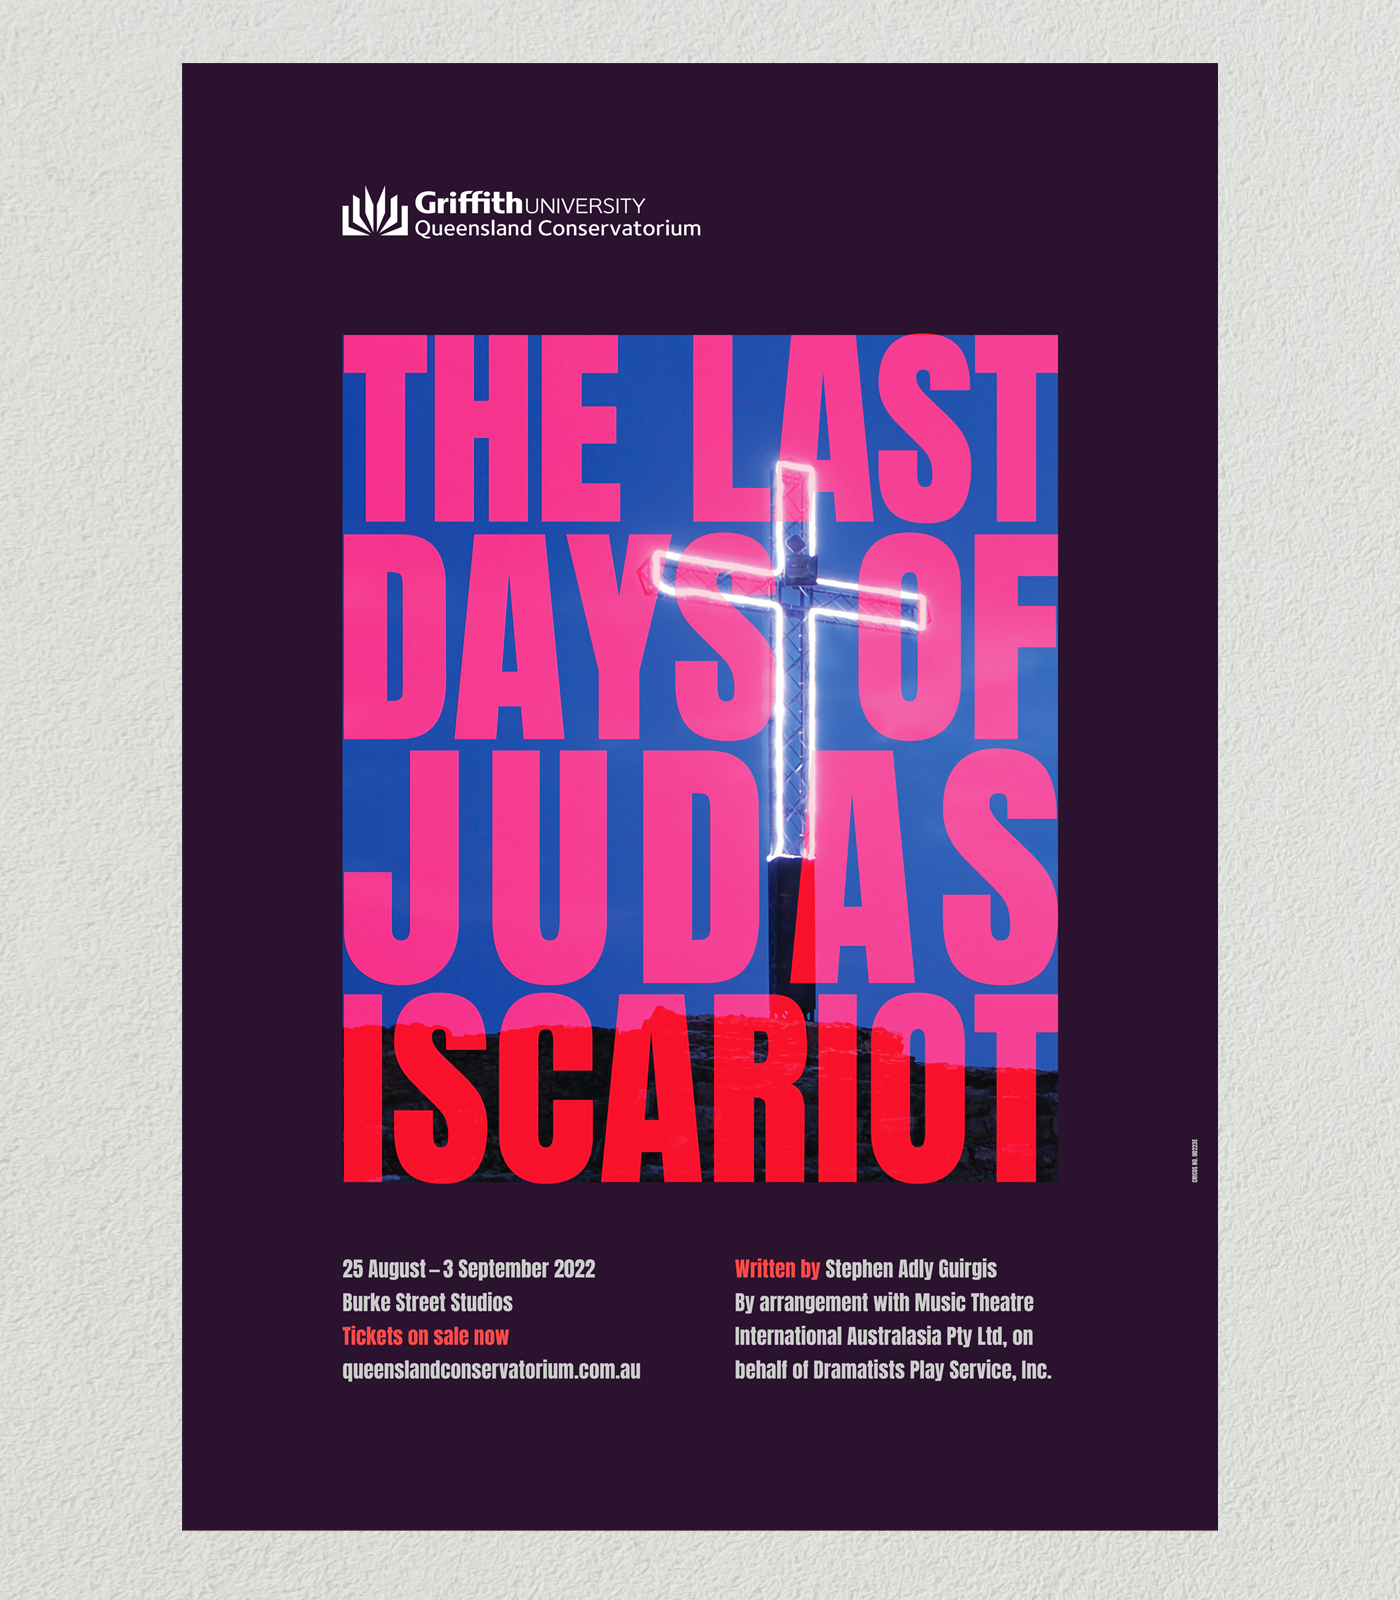 The Last Days of Judas Iscariot Production Poster